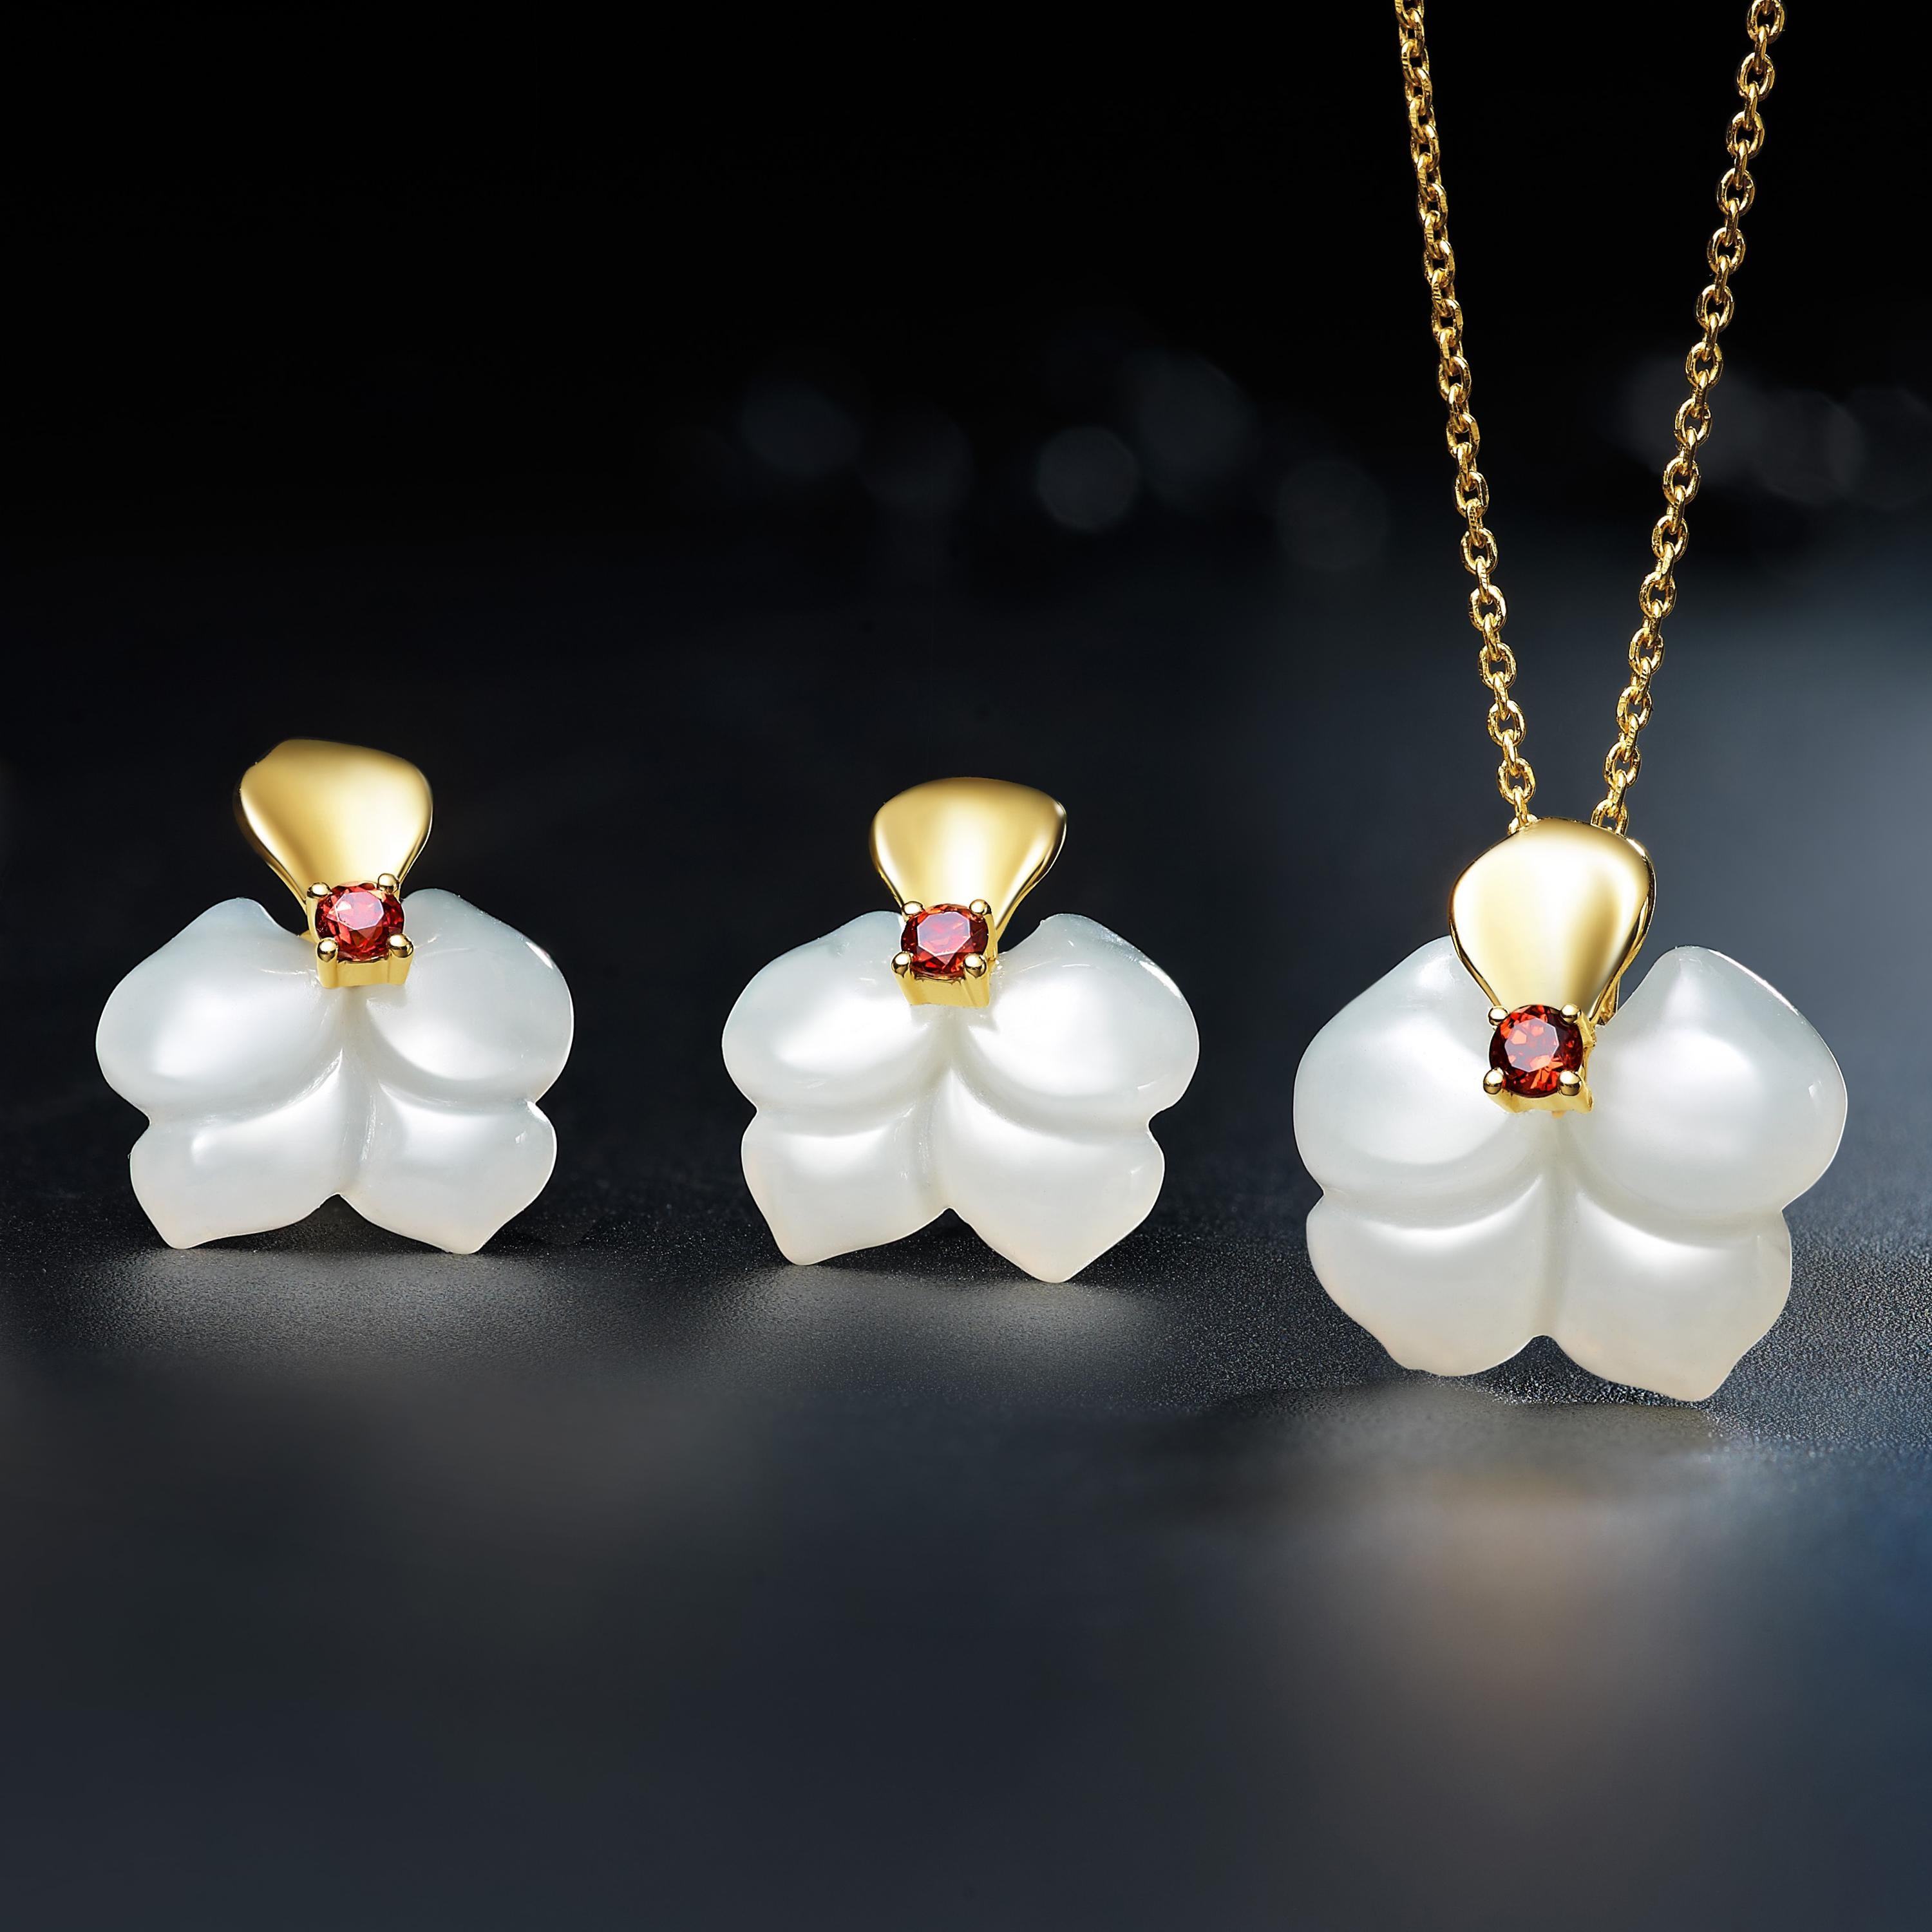 Description:
Earrings - Orchid stud earrings with orchid carved Russian nephrite and red garnets, set in 14 karat yellow gold.

Necklace - Orchid necklace with orchid carved Russian nephrite and red garnet, set in 14 karat yellow gold. The chain is